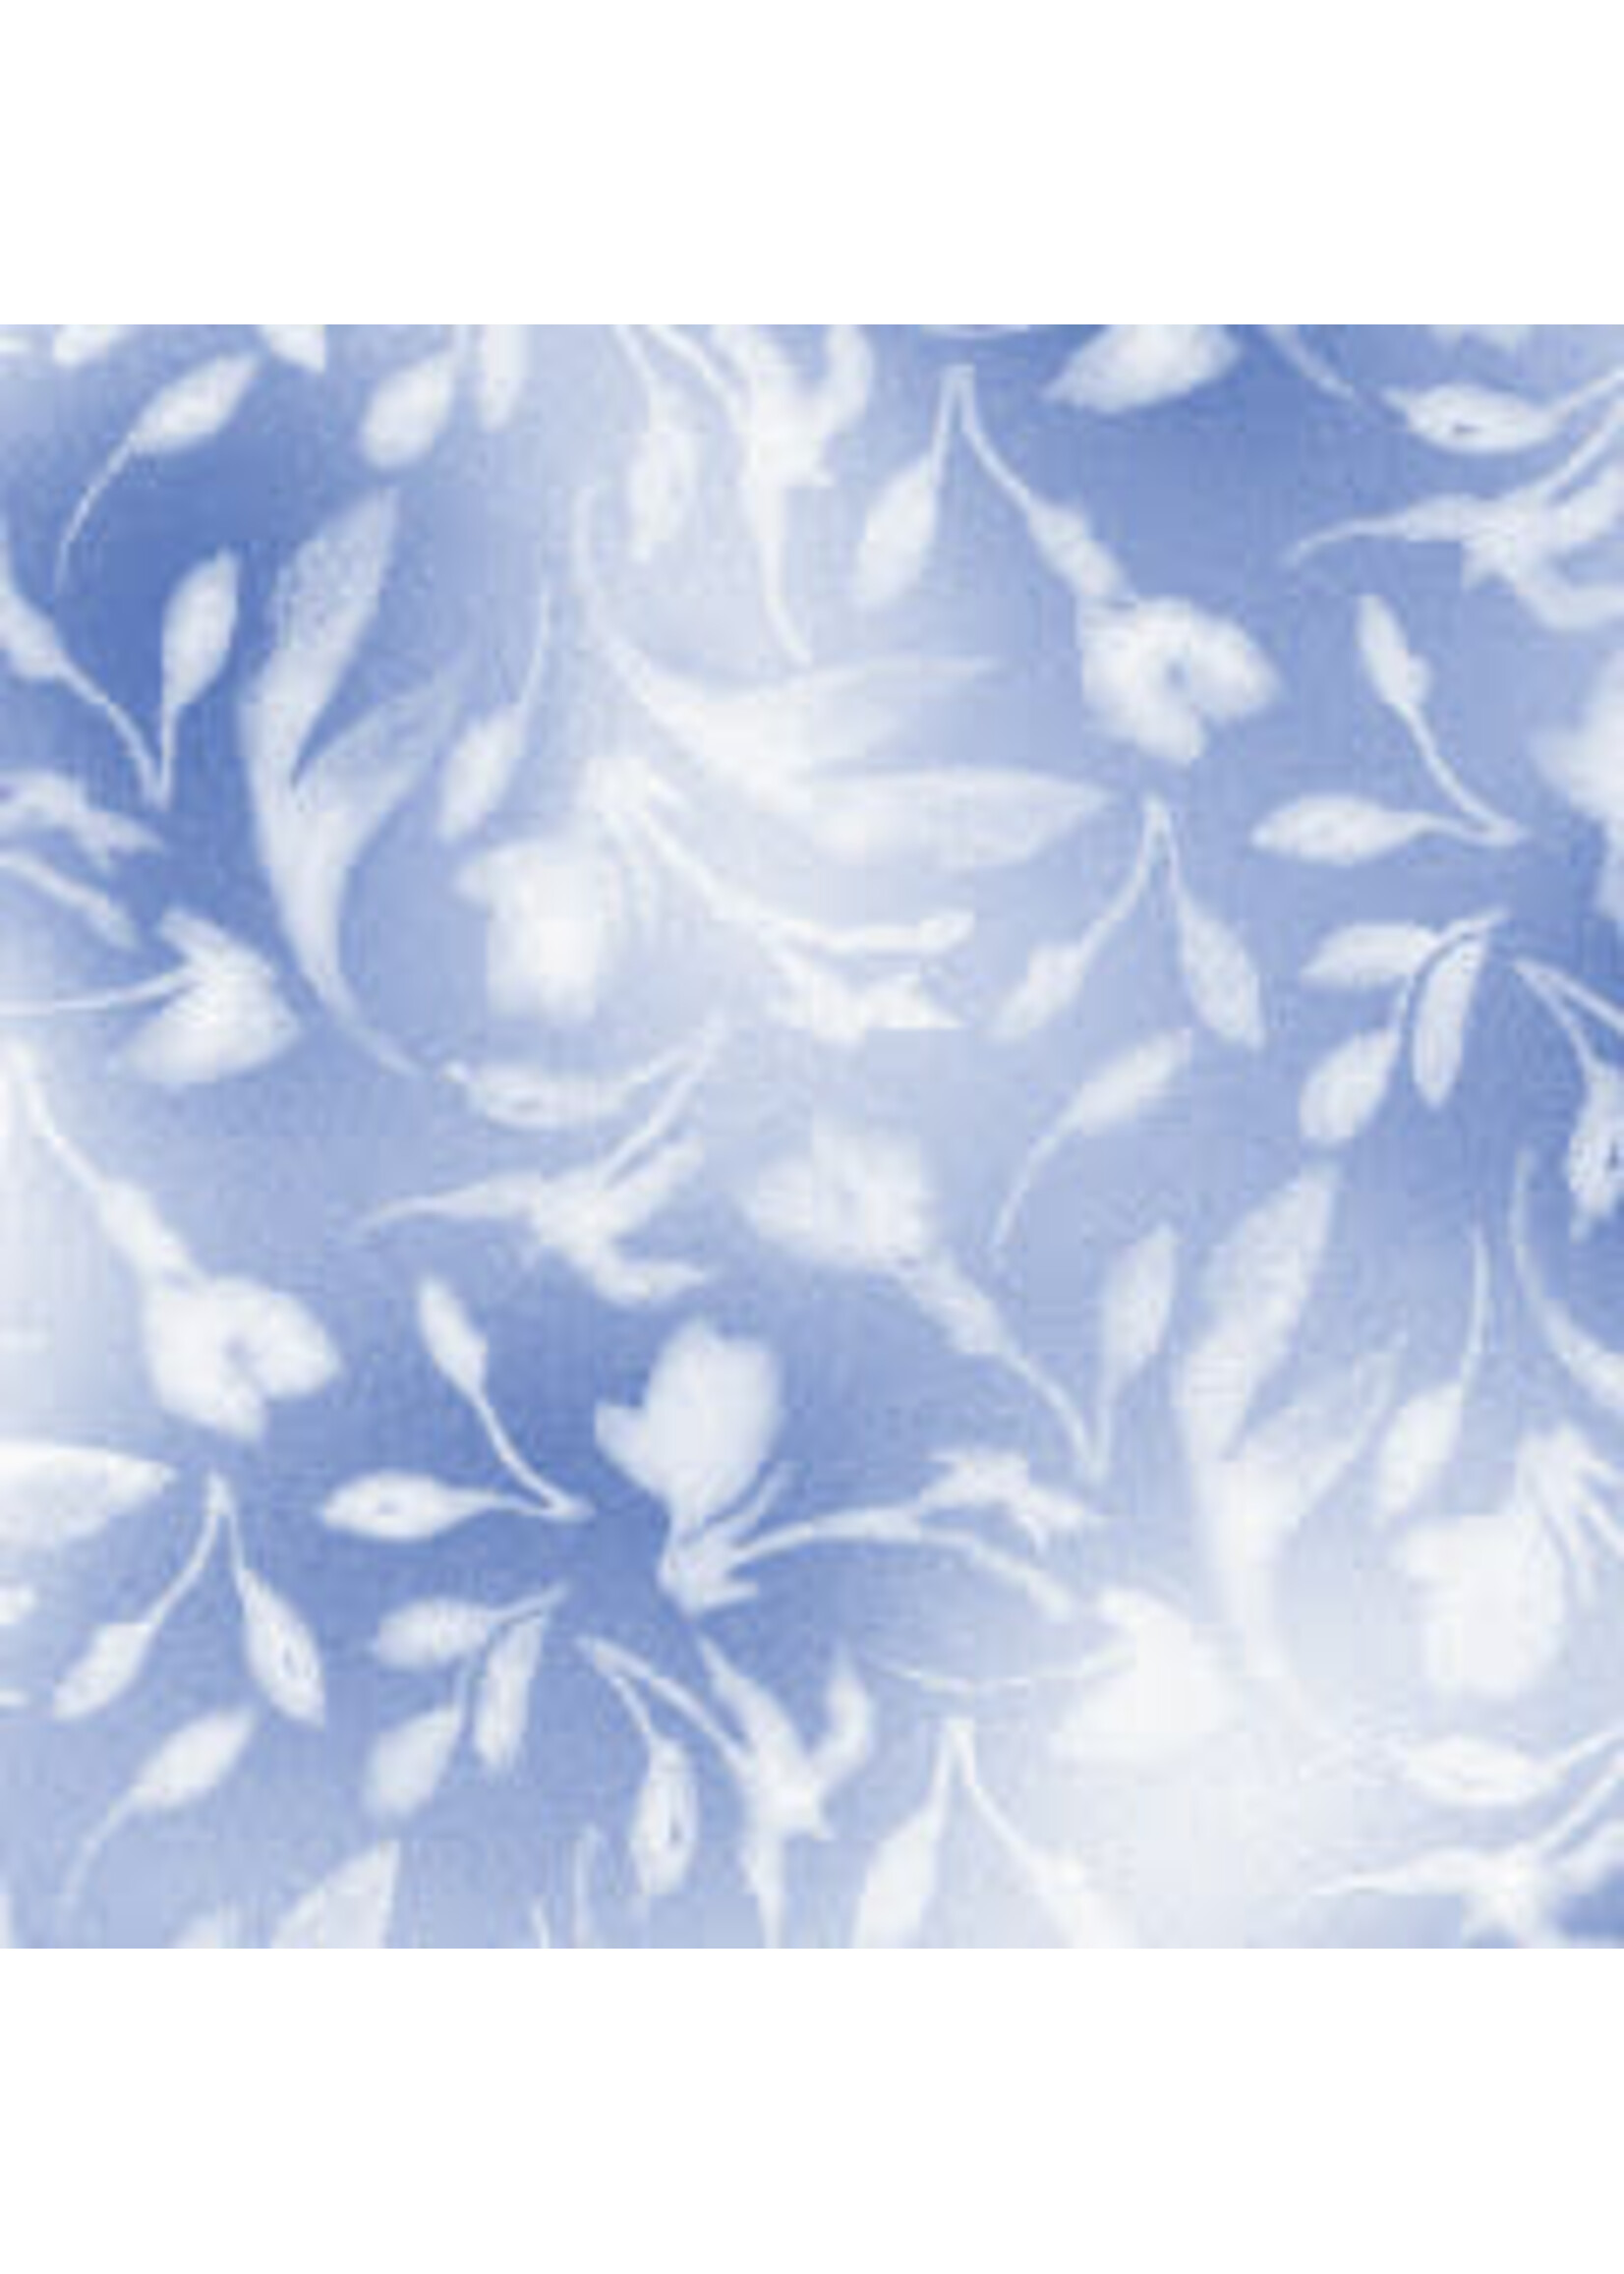 Maywood Studio Silver Jubilee - Soft Floral - White - Coupon - 95 cm x 110 cm